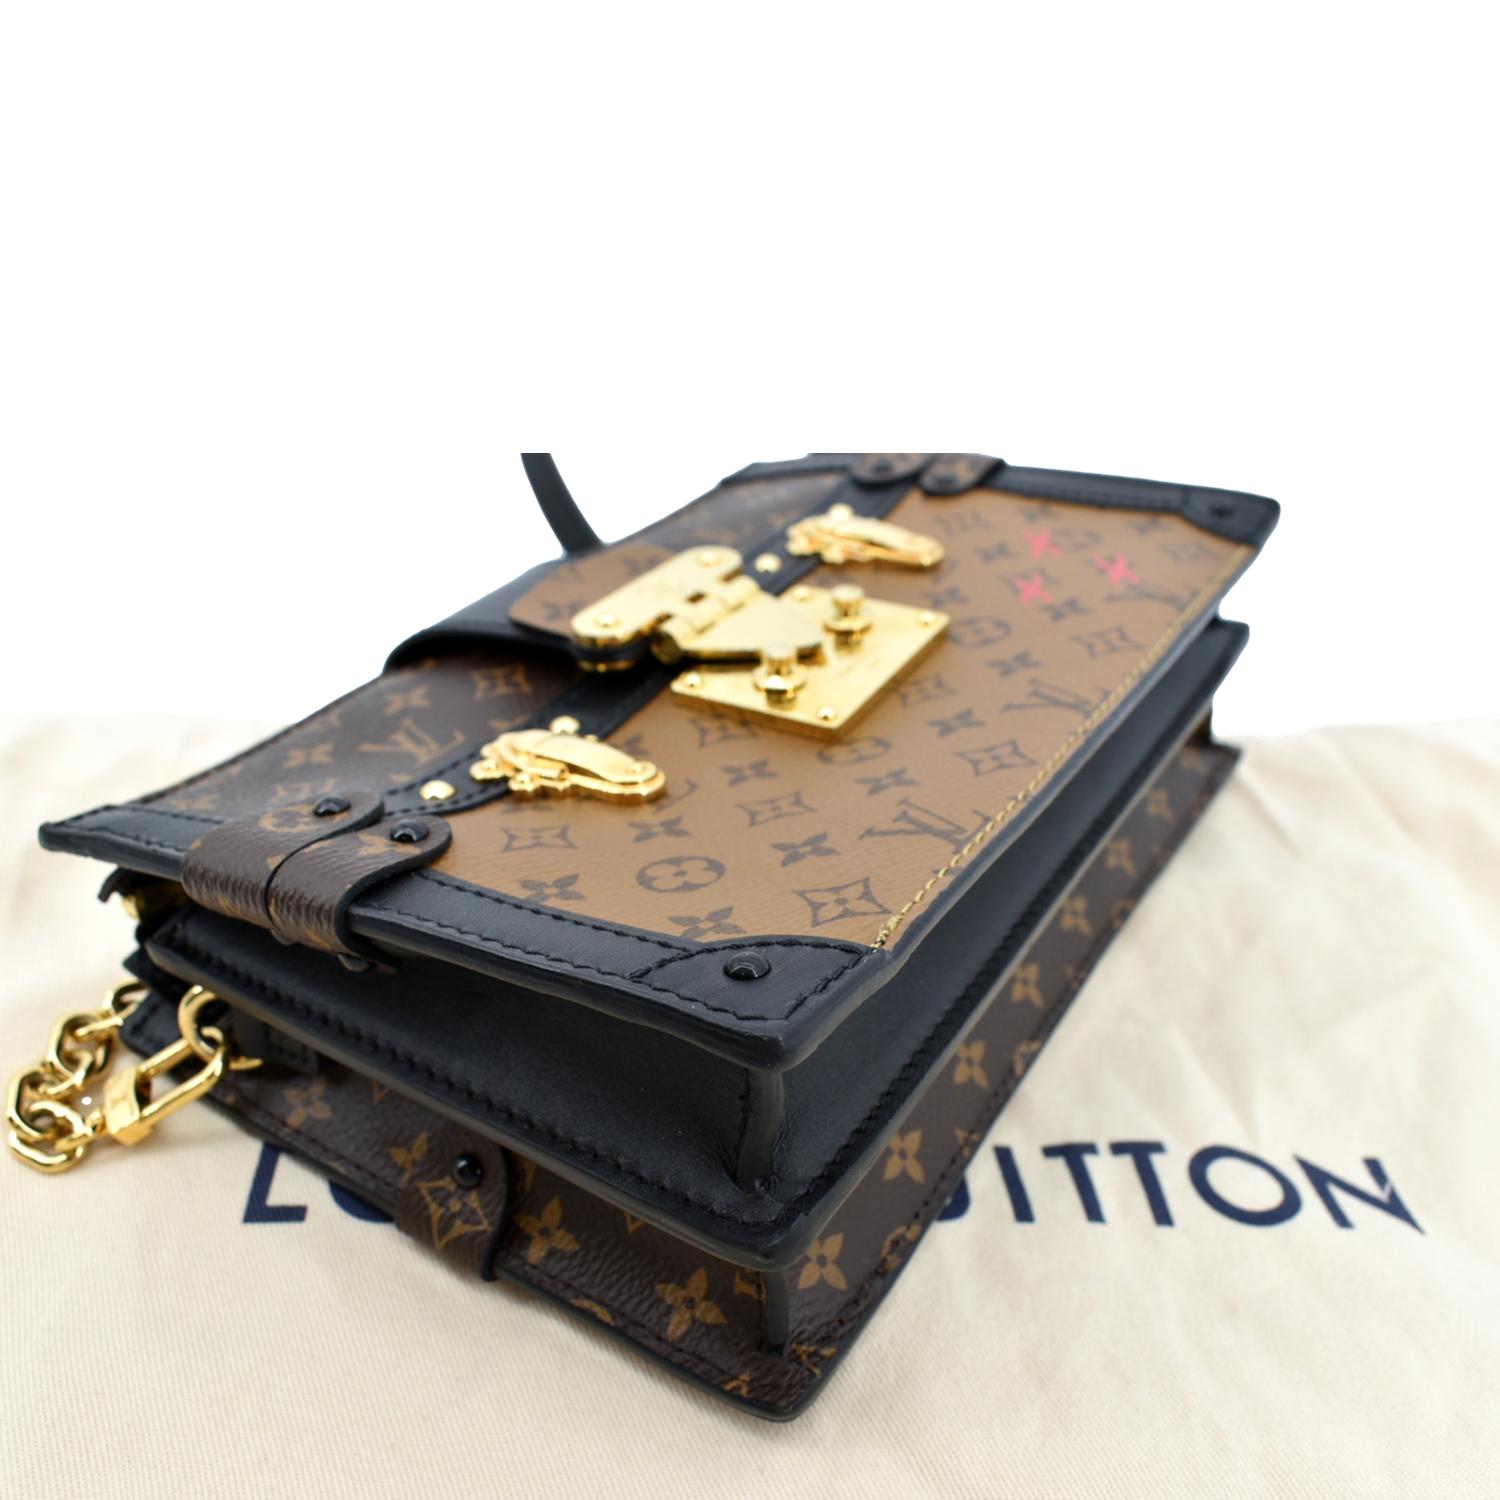 The Hottest Clutch In The World: Louis Vuitton's Petite Malle Trunk